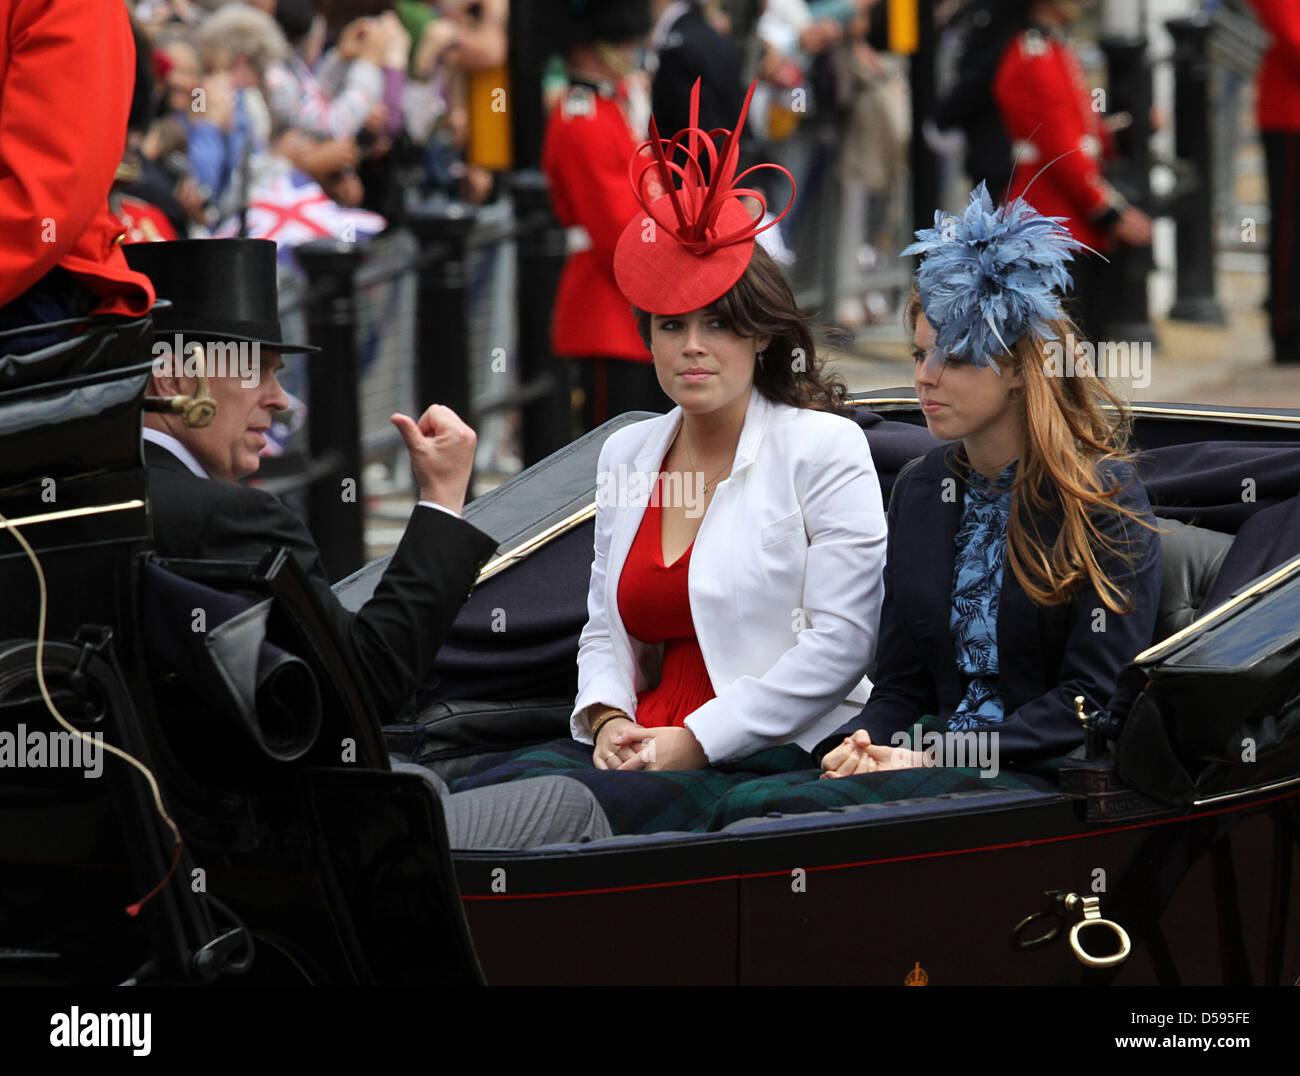 Britain's Princess Eugenie (C) and Princess Beatrice leave Buckingham Palace to attend the Trooping the Colour ceremony, in London, Britain, 12 June 2010. Trooping the Colour is a ceremony to honour the sovereign's official birthday, even though Britain's Queen Elizabeth, 82, was born on 21 April 1926. 1,100 soldiers from the Household Division take part in the ceremony. The parade Stock Photo